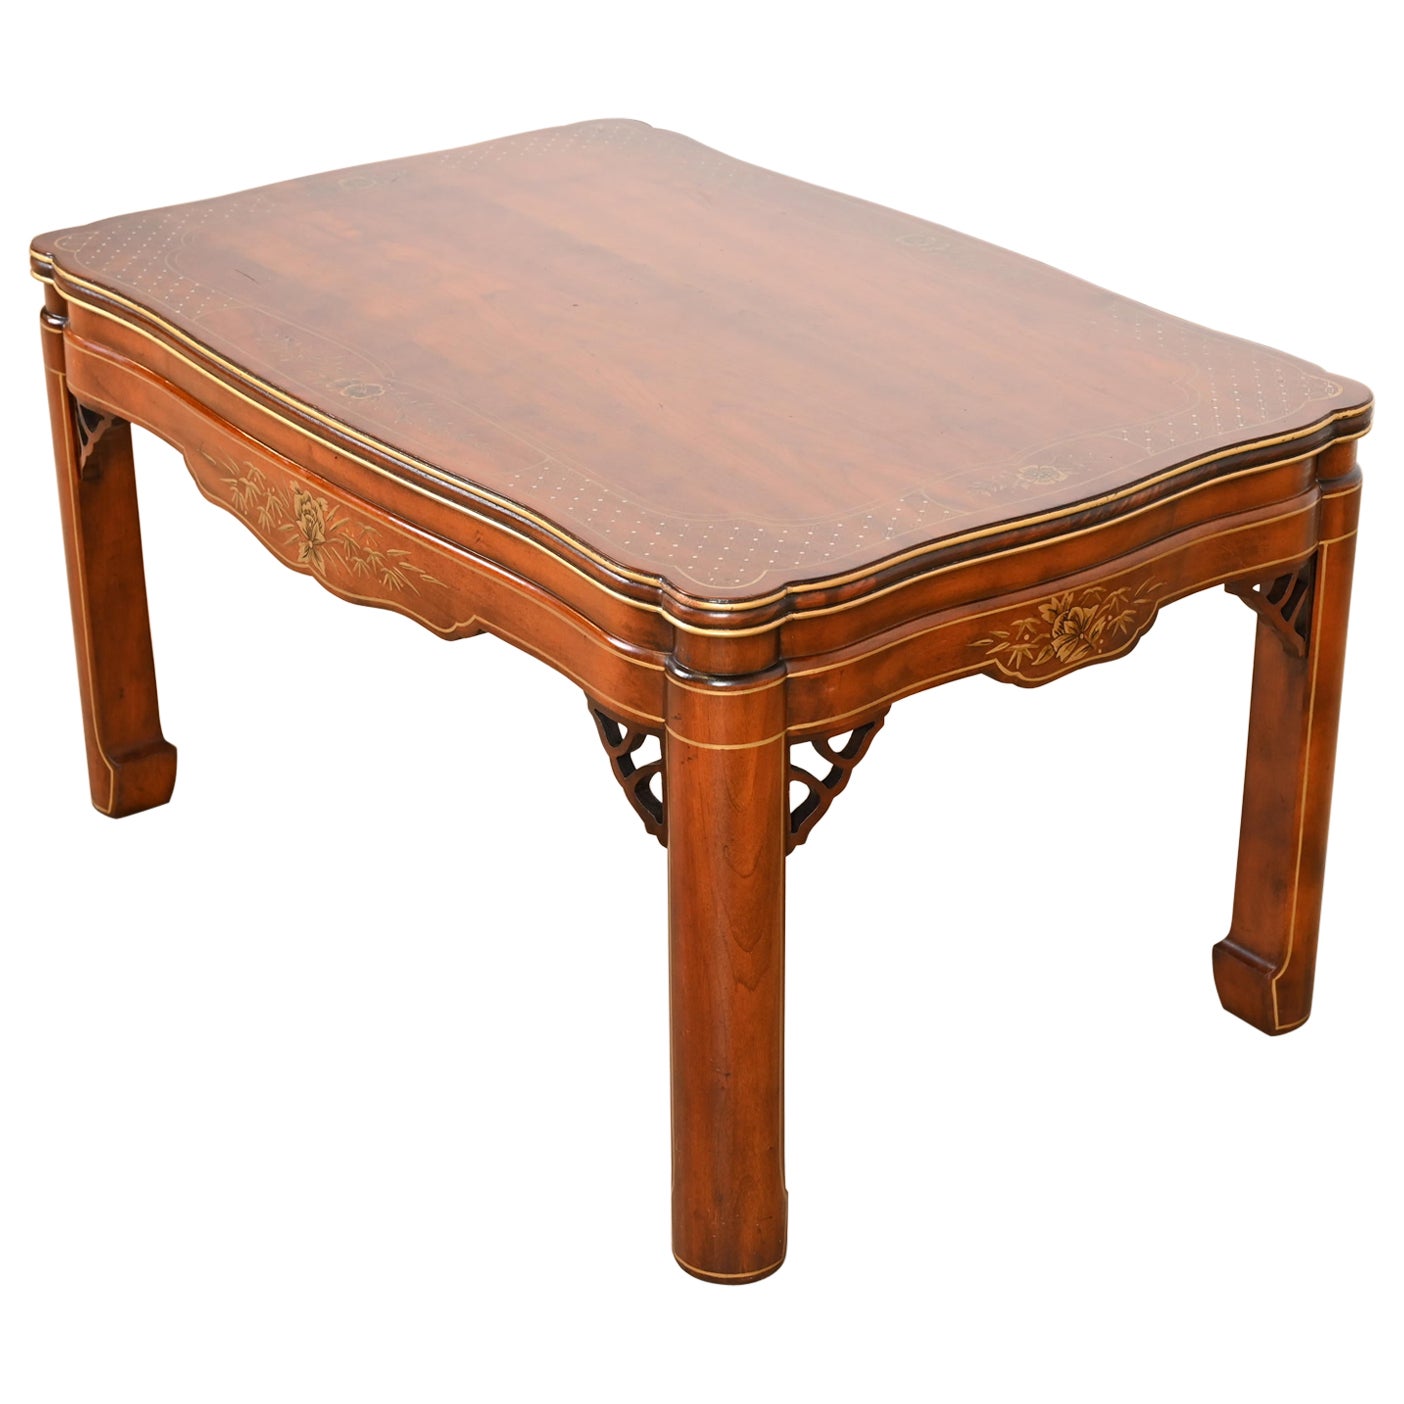 Kindel Furniture Hollywood Regency Chinoiserie Painted Cherry Wood Coffee Table For Sale